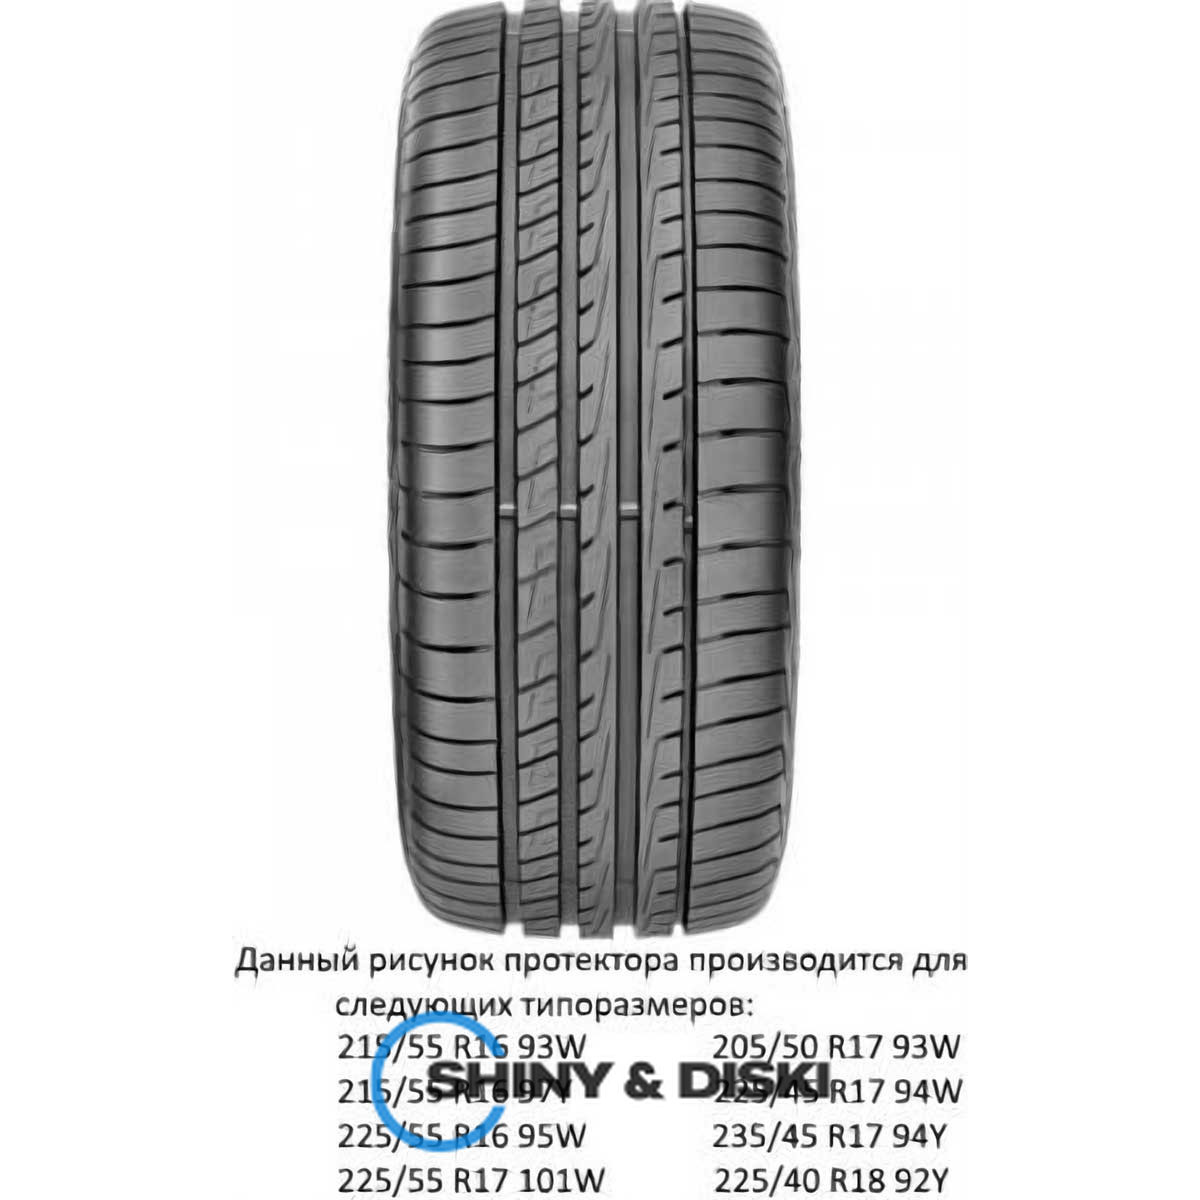 гума kelly uhp 215/55 r16 93w fp